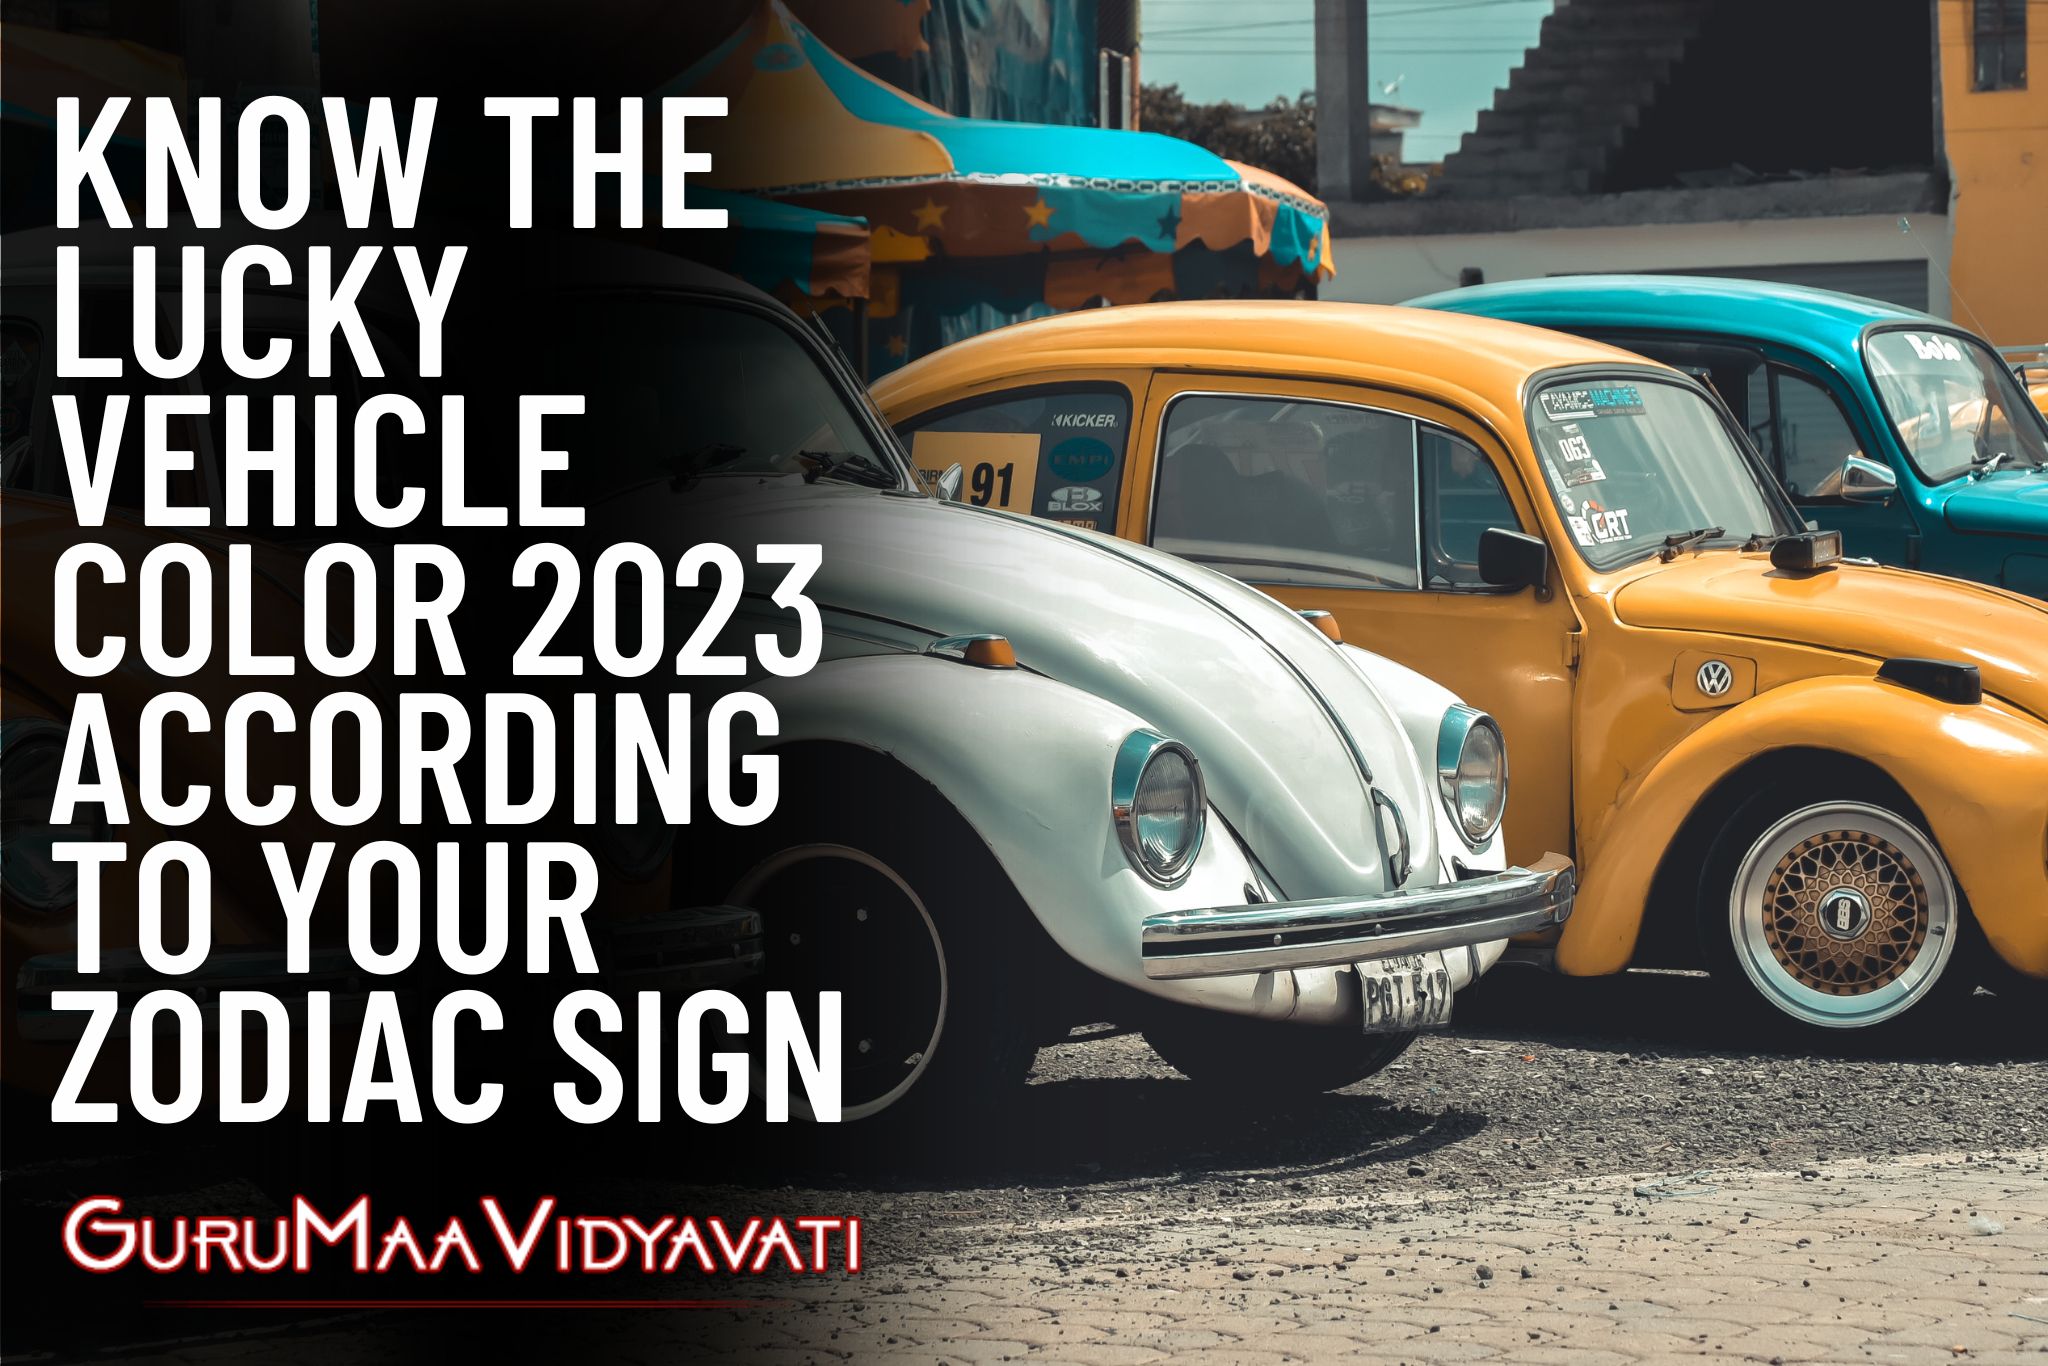 Know the Lucky Vehicle Color 2023 According to Your Zodiac Sign